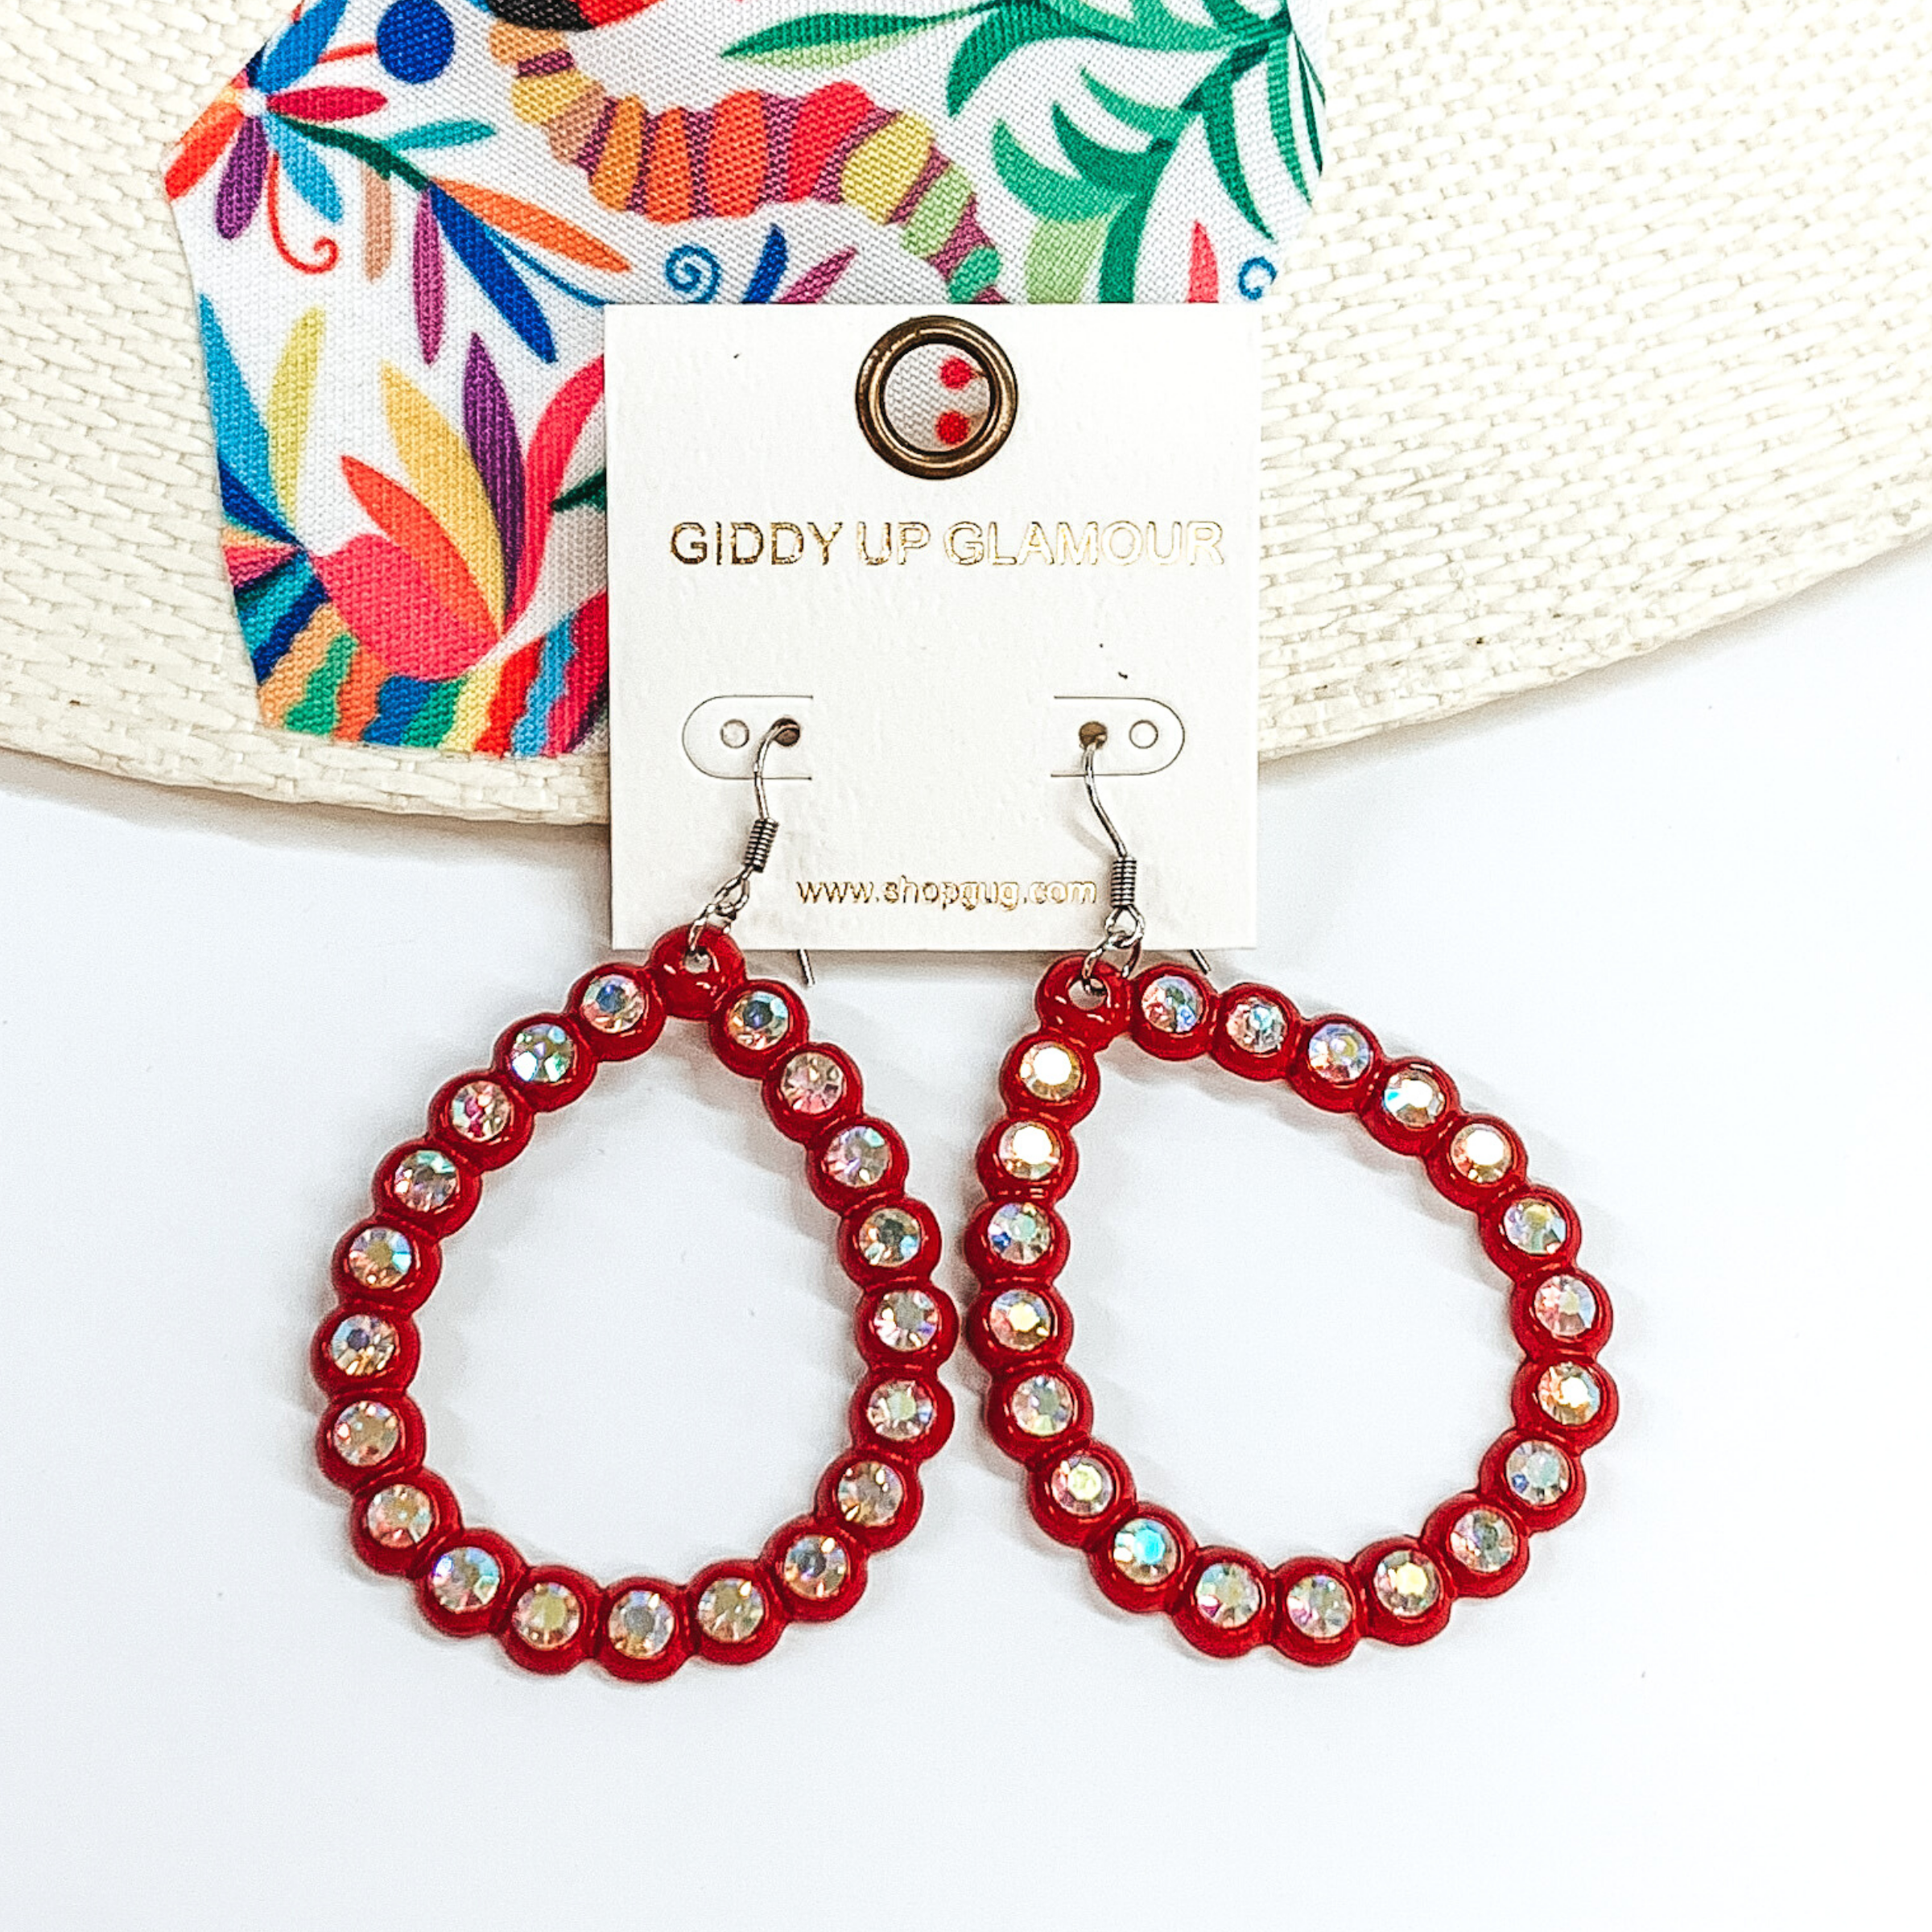 Red, open teardrop earrings with ab crystal outline. These earrings are pictured on a white background with a colorful piece of fabric behind them.